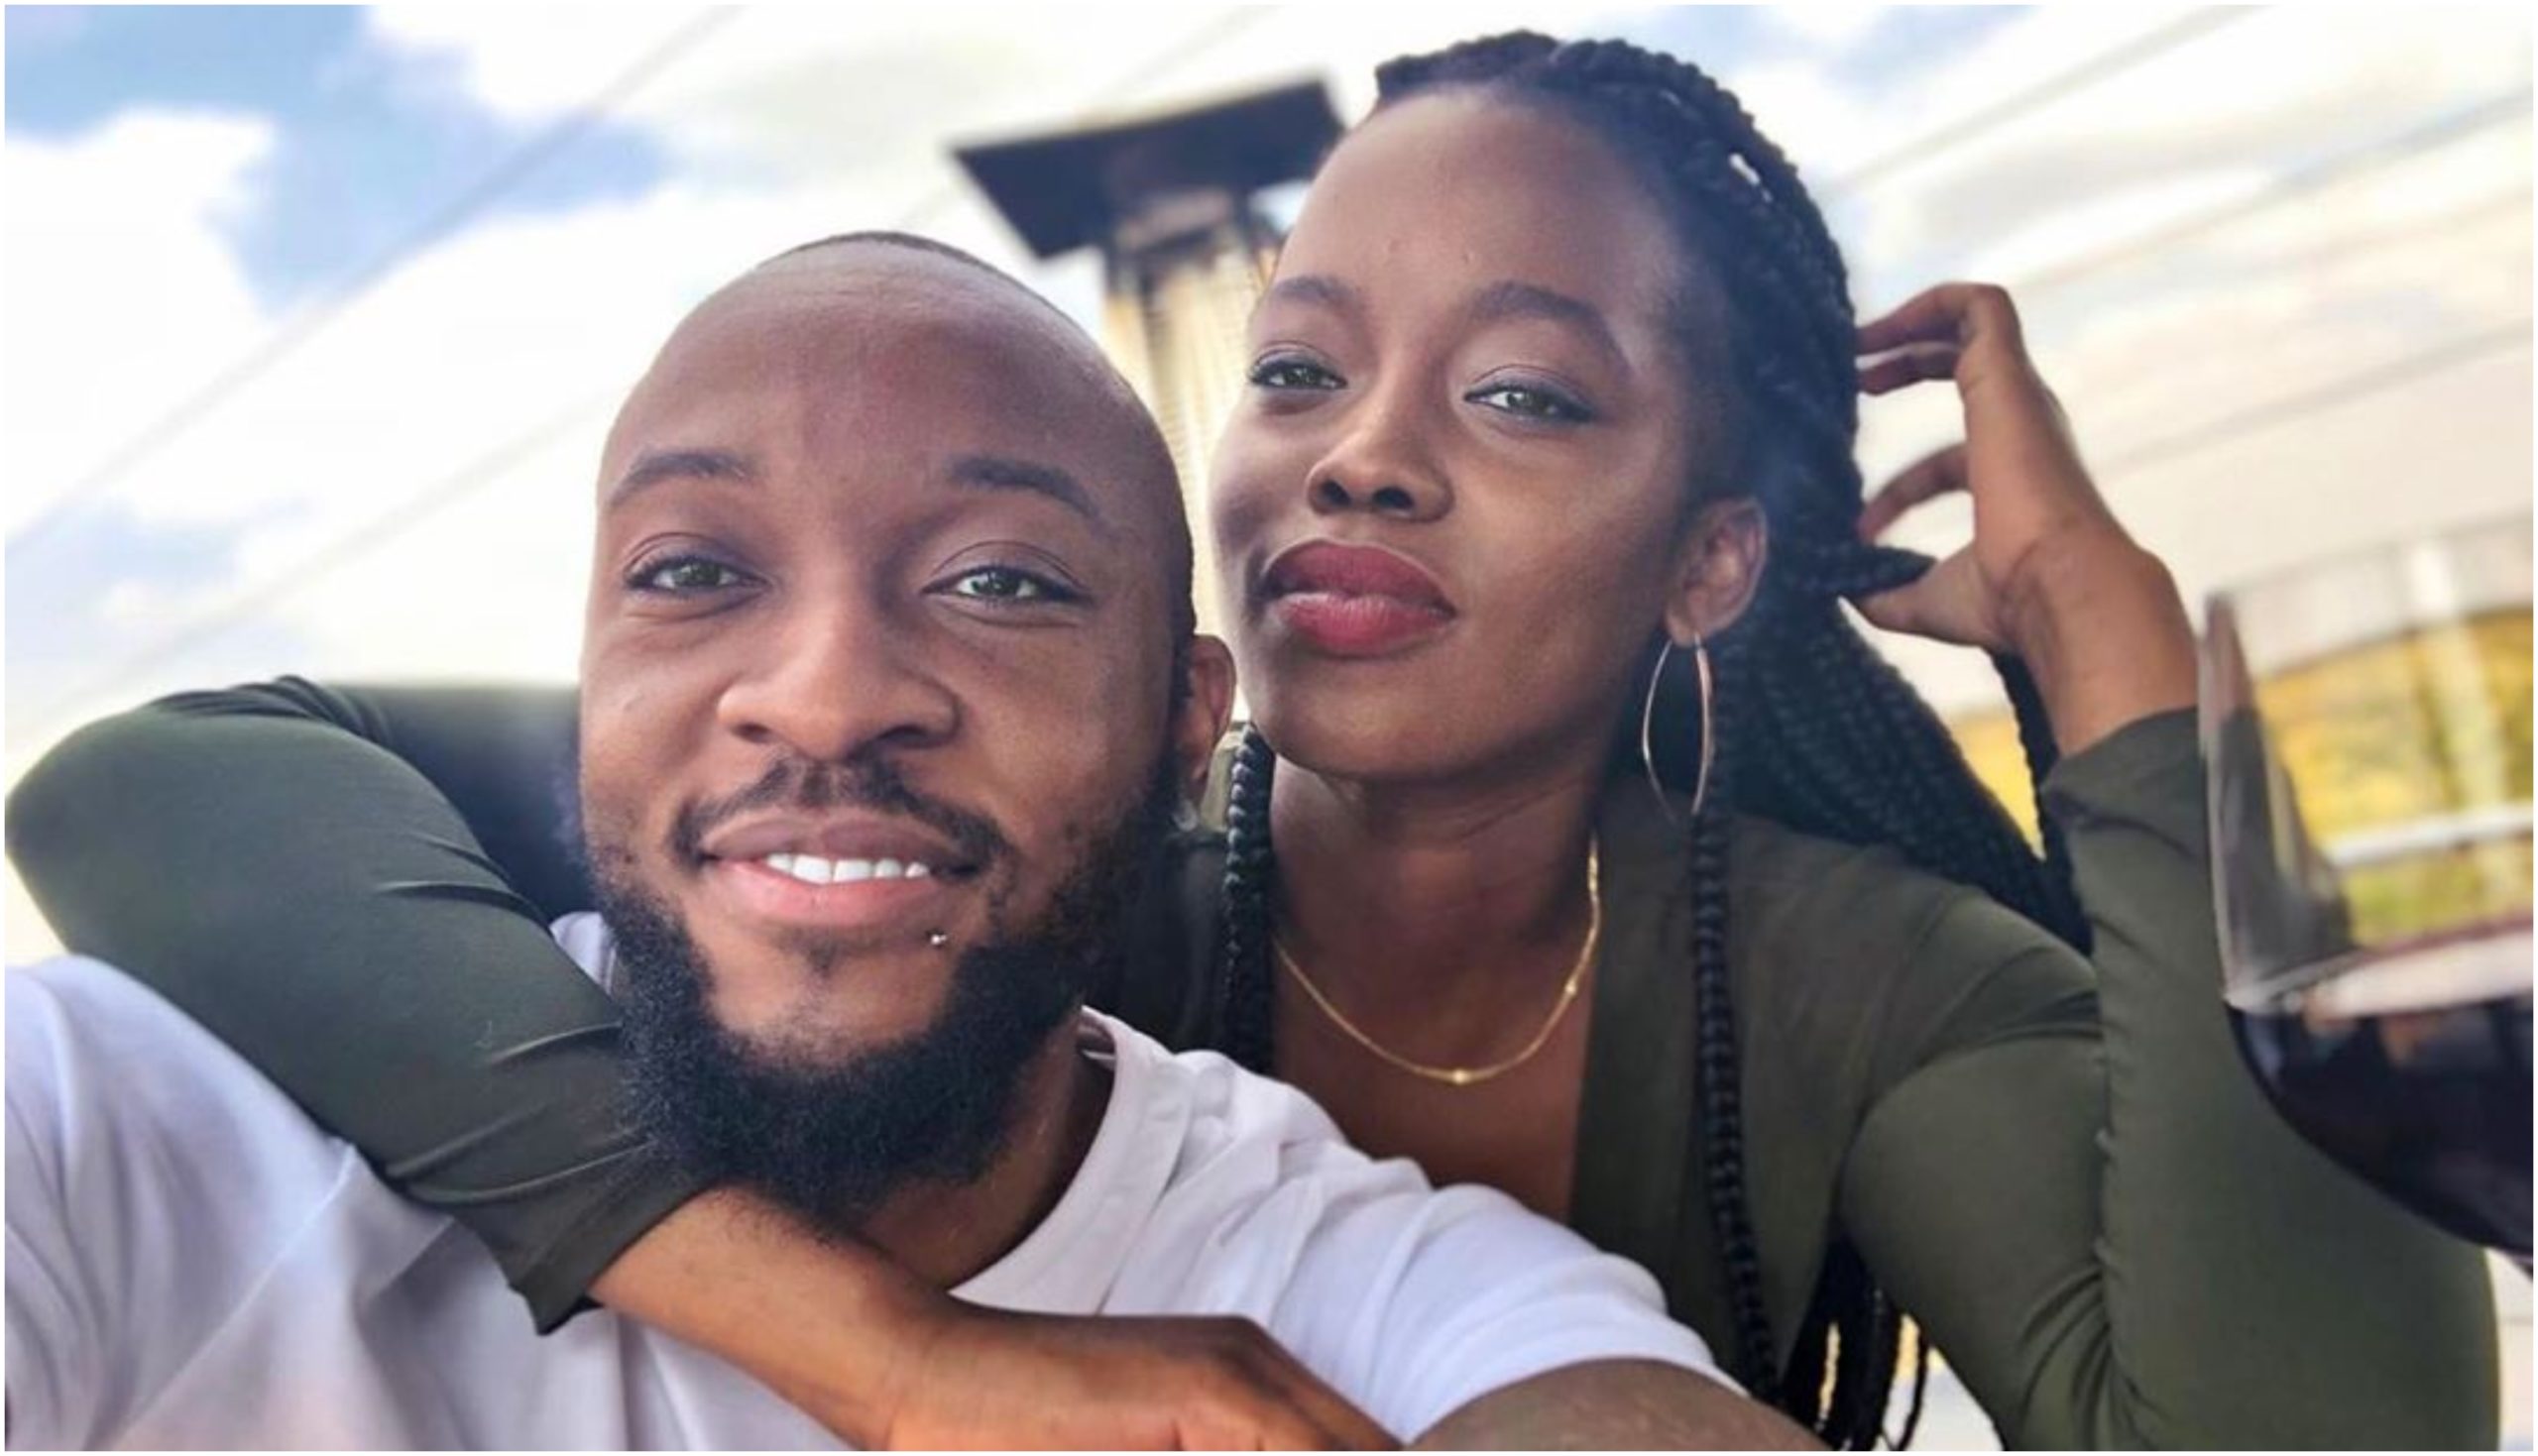 Frankie Just Gym It and Corazon Kwamboka facing relationship issues?